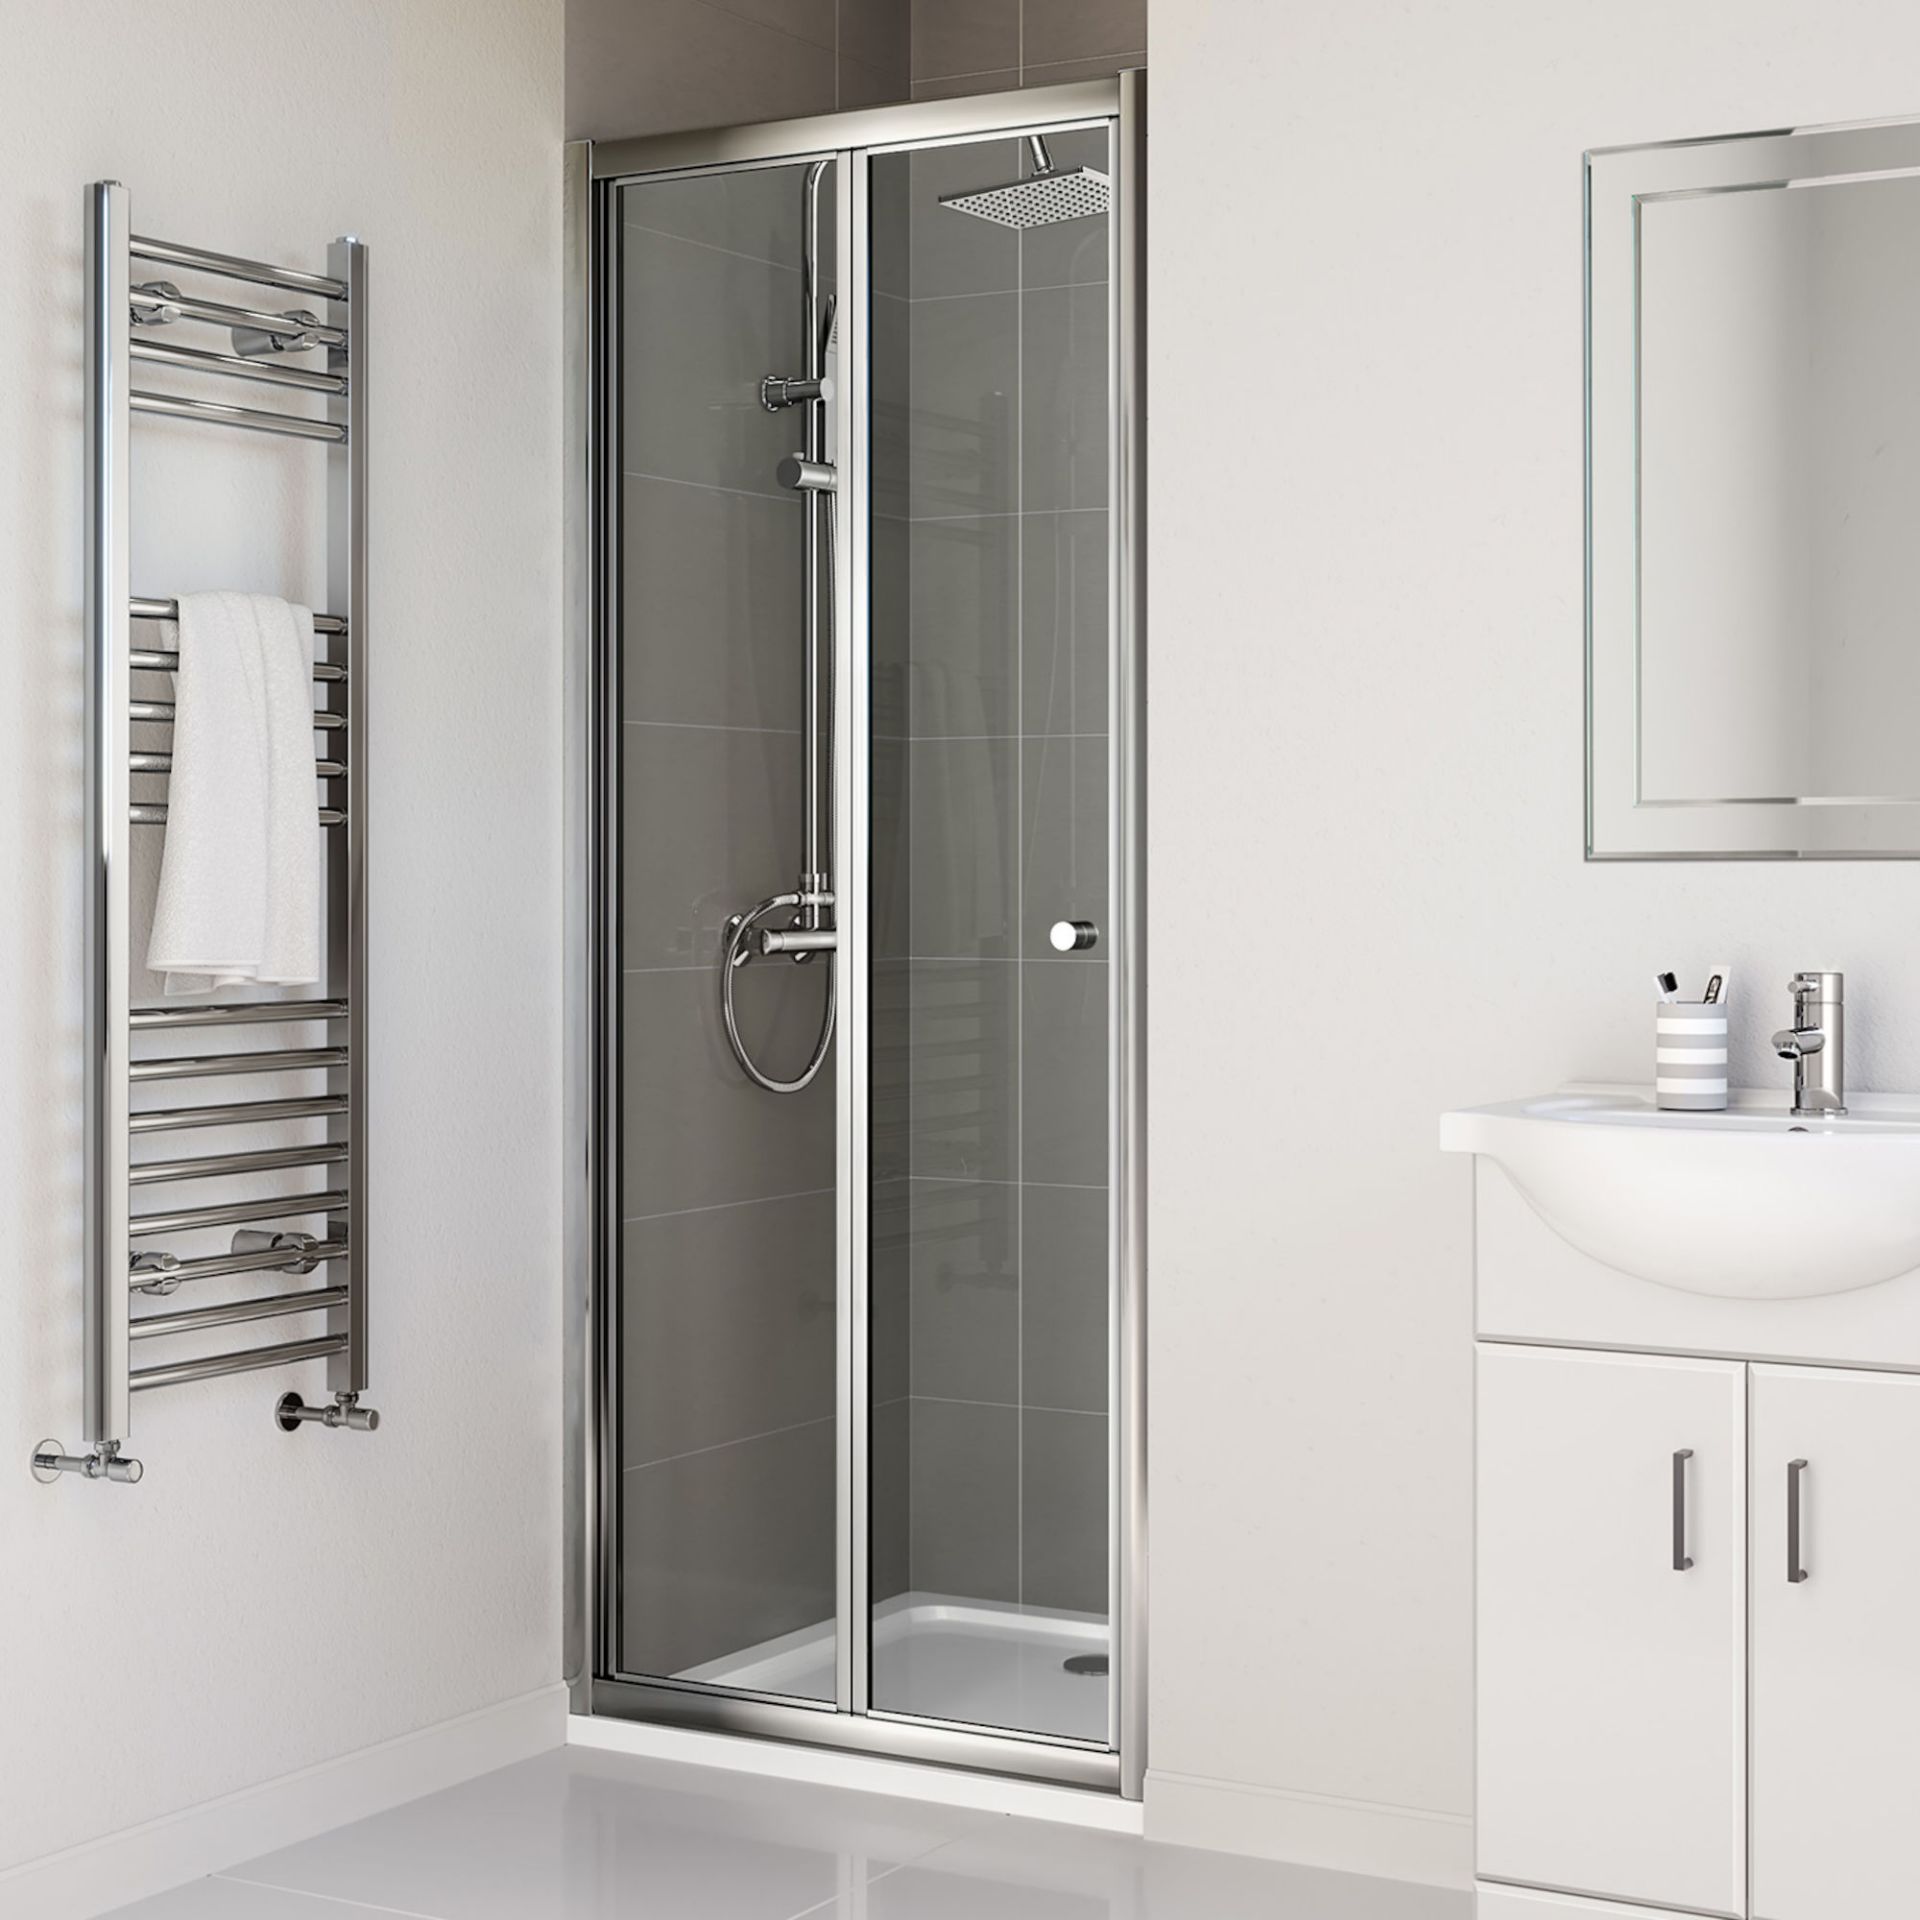 (XM12) 800mm - Elements Bi Fold Shower Door. RRP £299.99. 4mm Safety Glass Fully waterproof tested